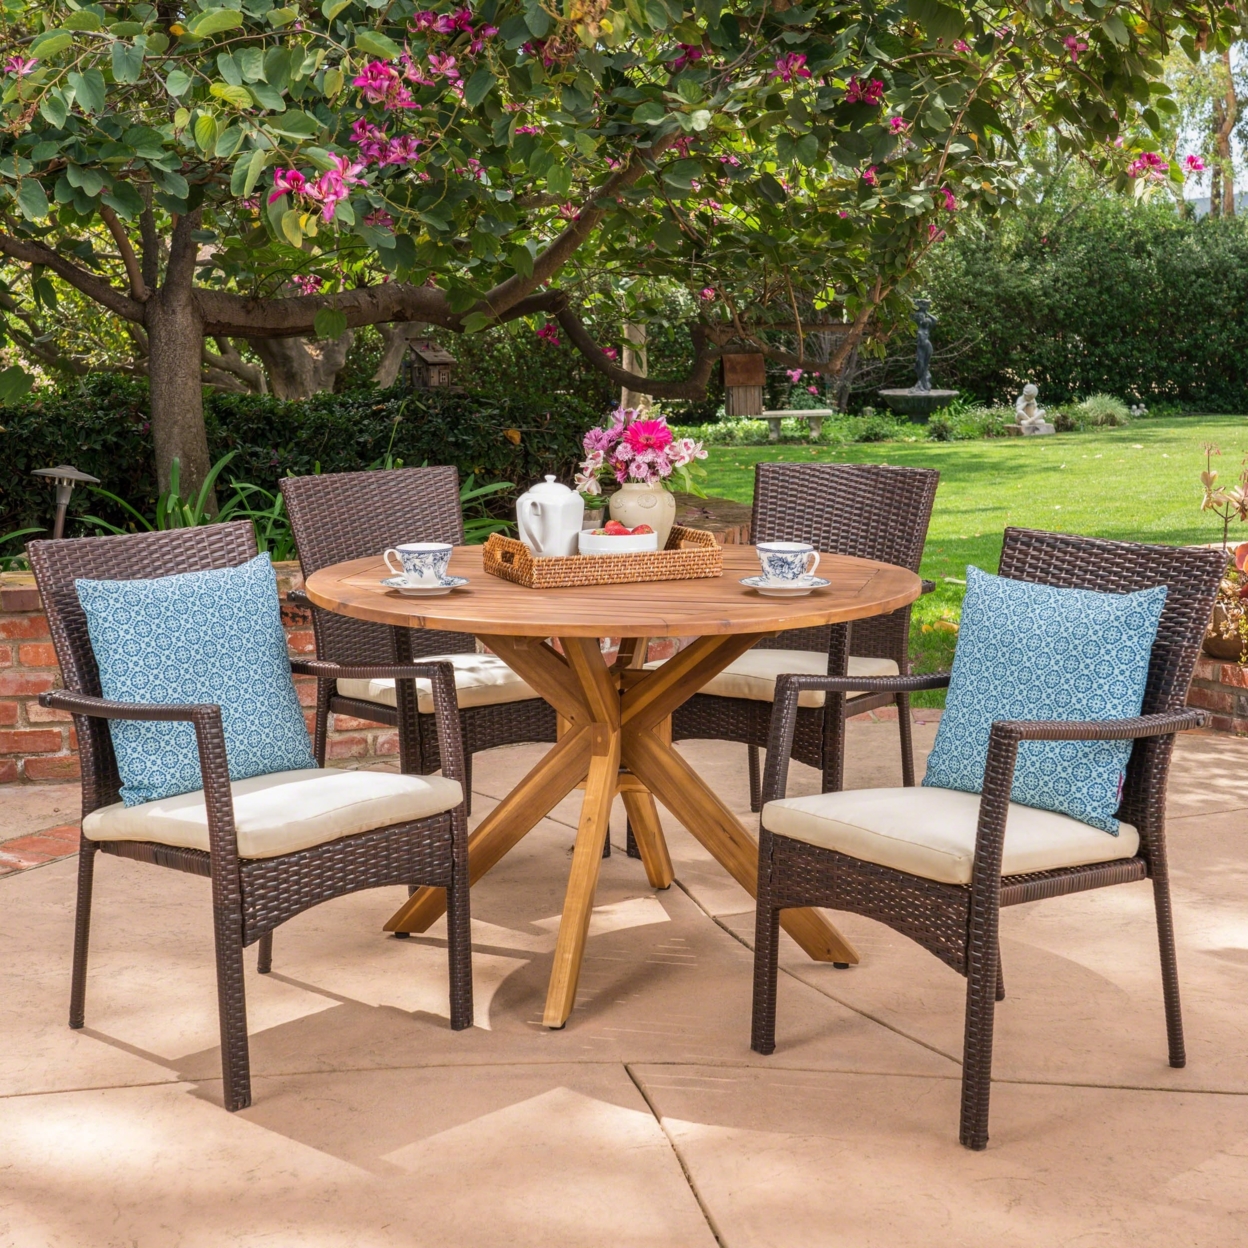 Joshua Outdoor 5 Piece Brown Wicker Dining Set With Teak Finish Acacia Wood Circular Table And CrÌ¬me Water Resistant Cushions